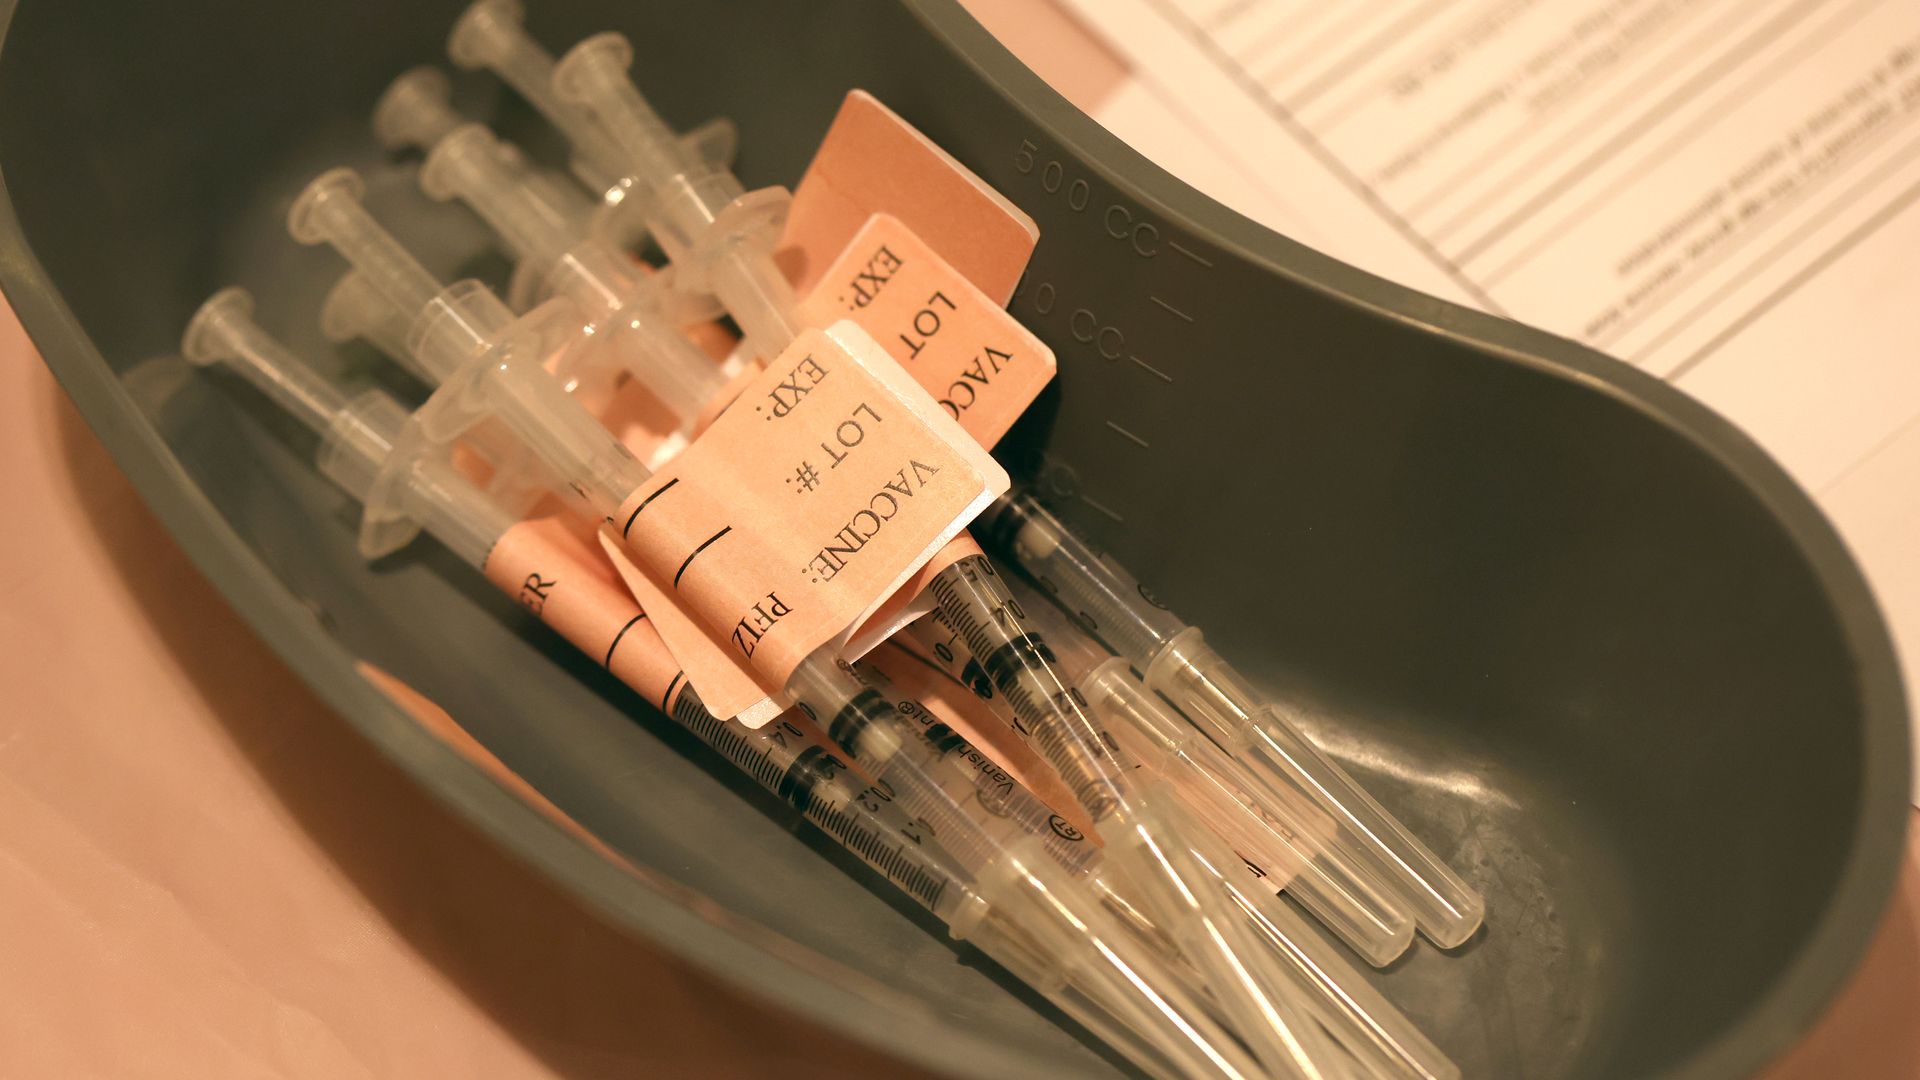 Syringes in a tray.